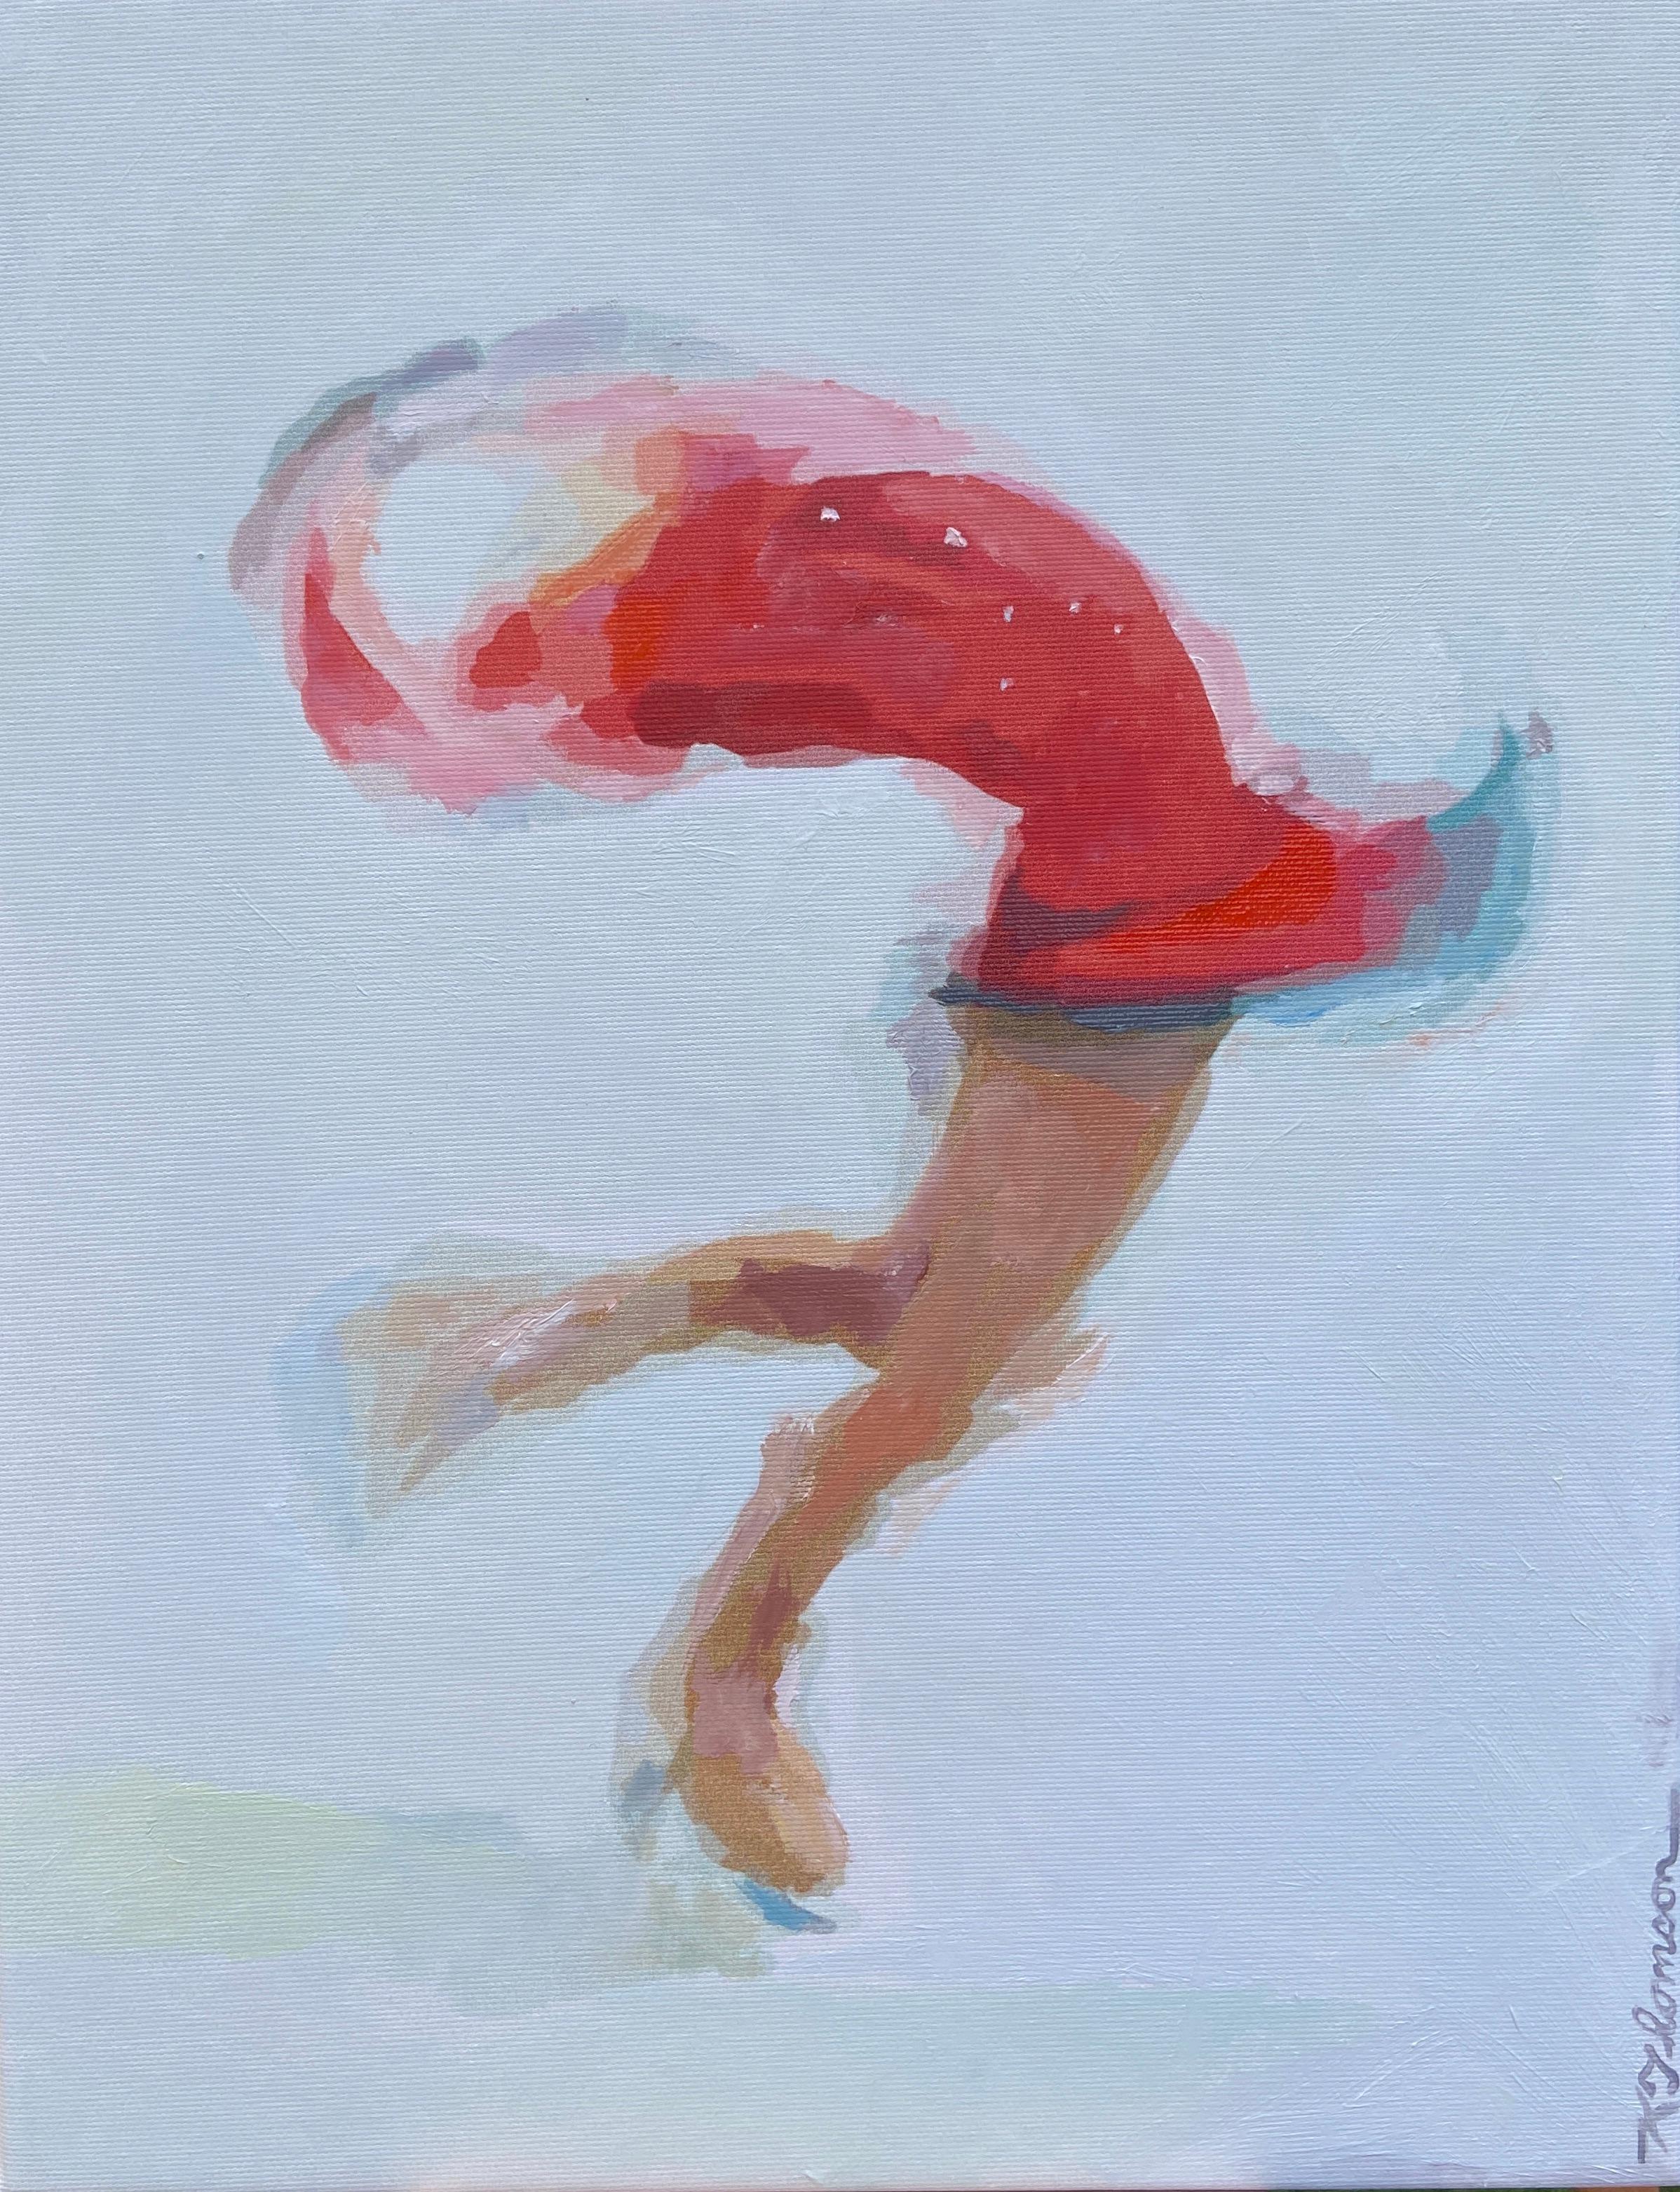 Figurative Skater, Original Painting - Mixed Media Art by Keith Thomson